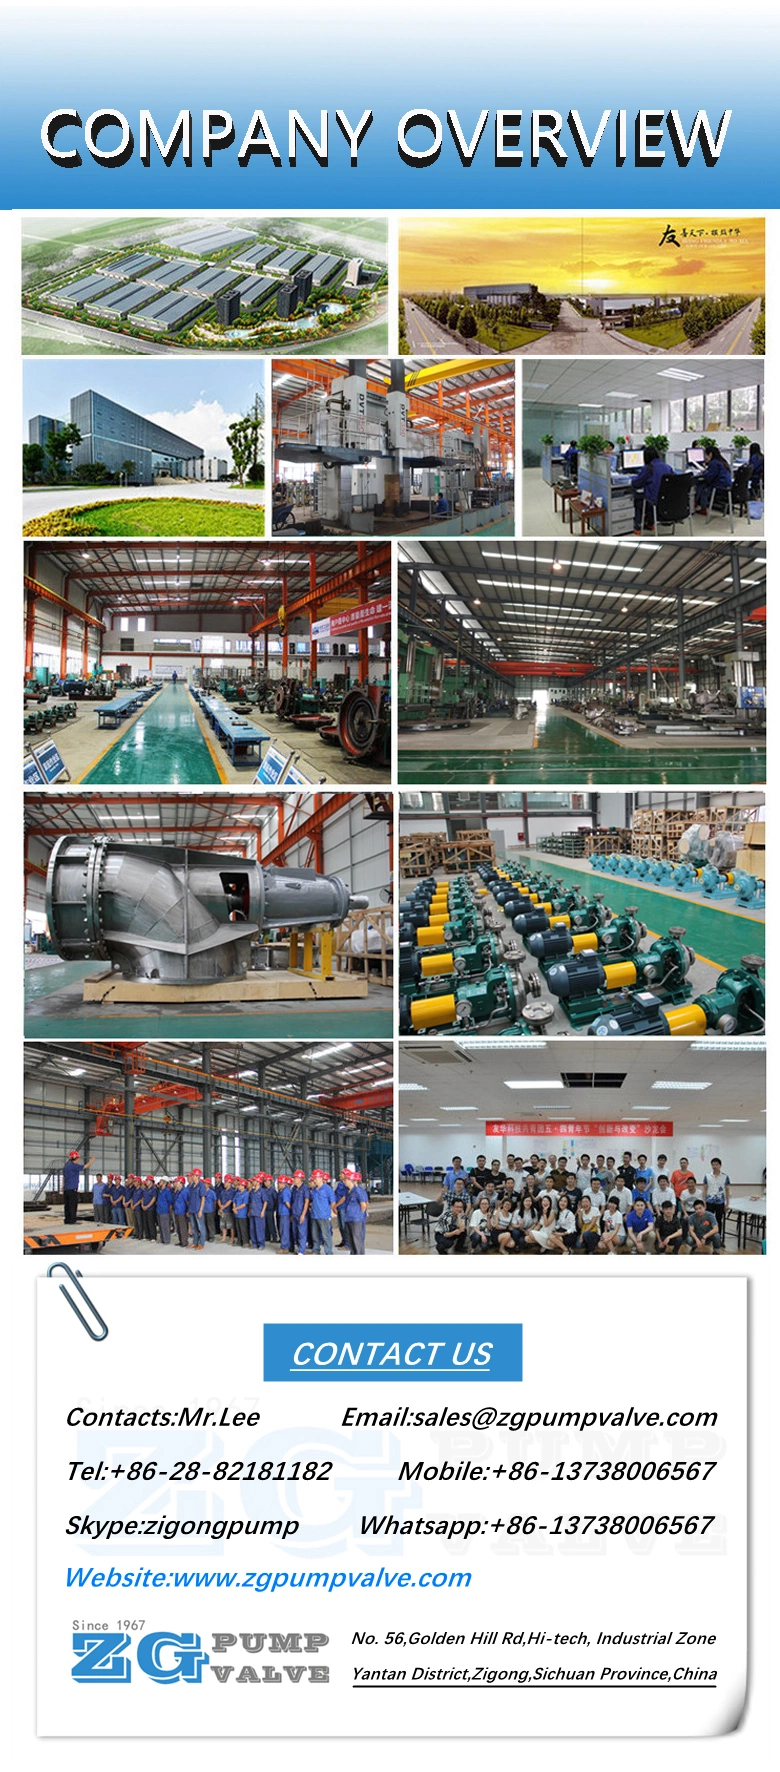 Duplex Stainless Steel 2205 2507 CD4MCU/Cast Iron Horizontal Multistage Chemical Centrifugal Water/Brine/Sea Water Pump